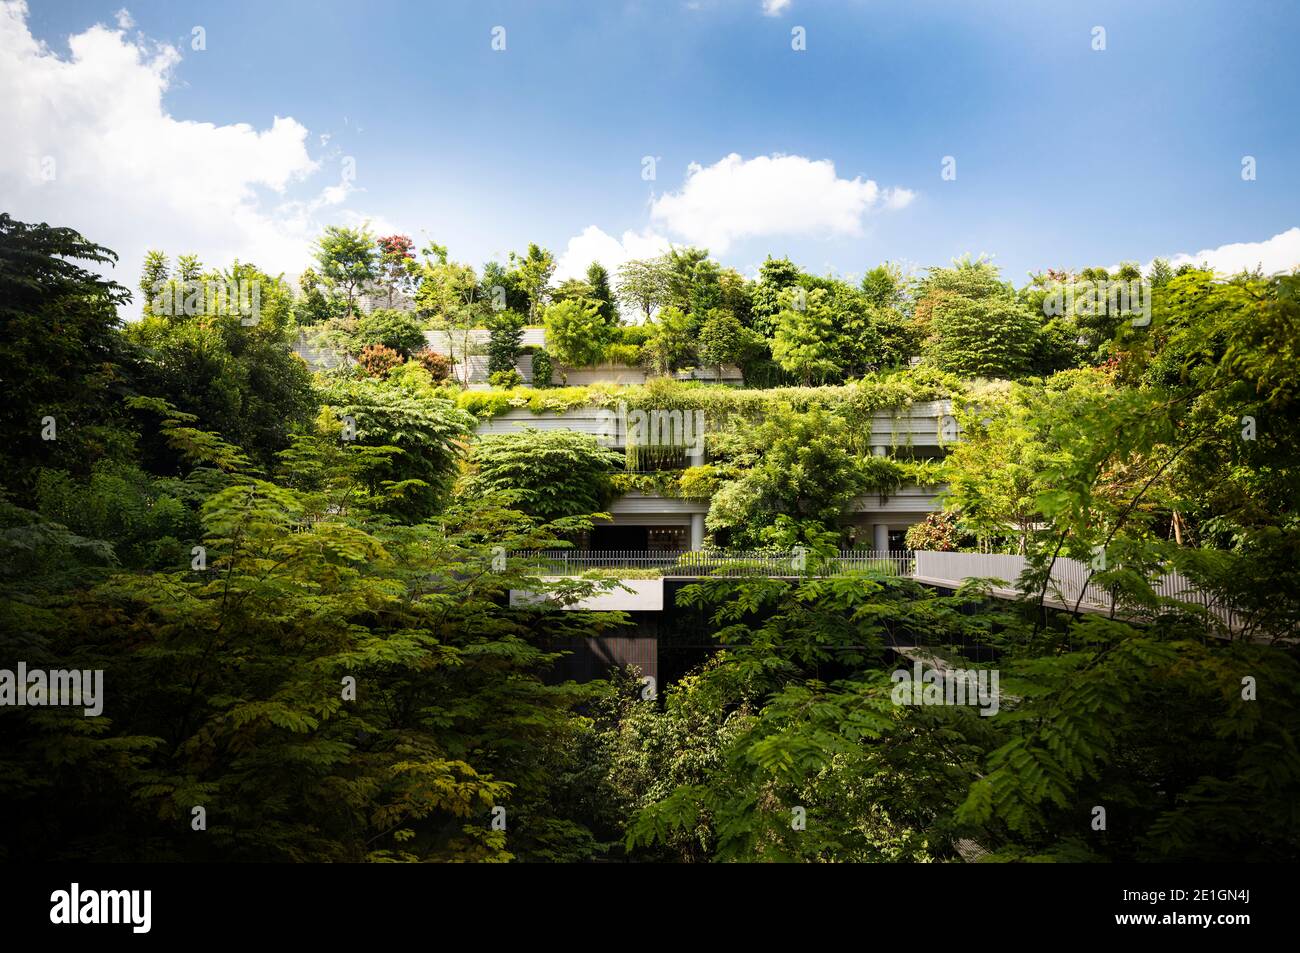 Exterior view of the mixed-use Kampung Admiralty development amidst lush gardens in Singapore. Stock Photo